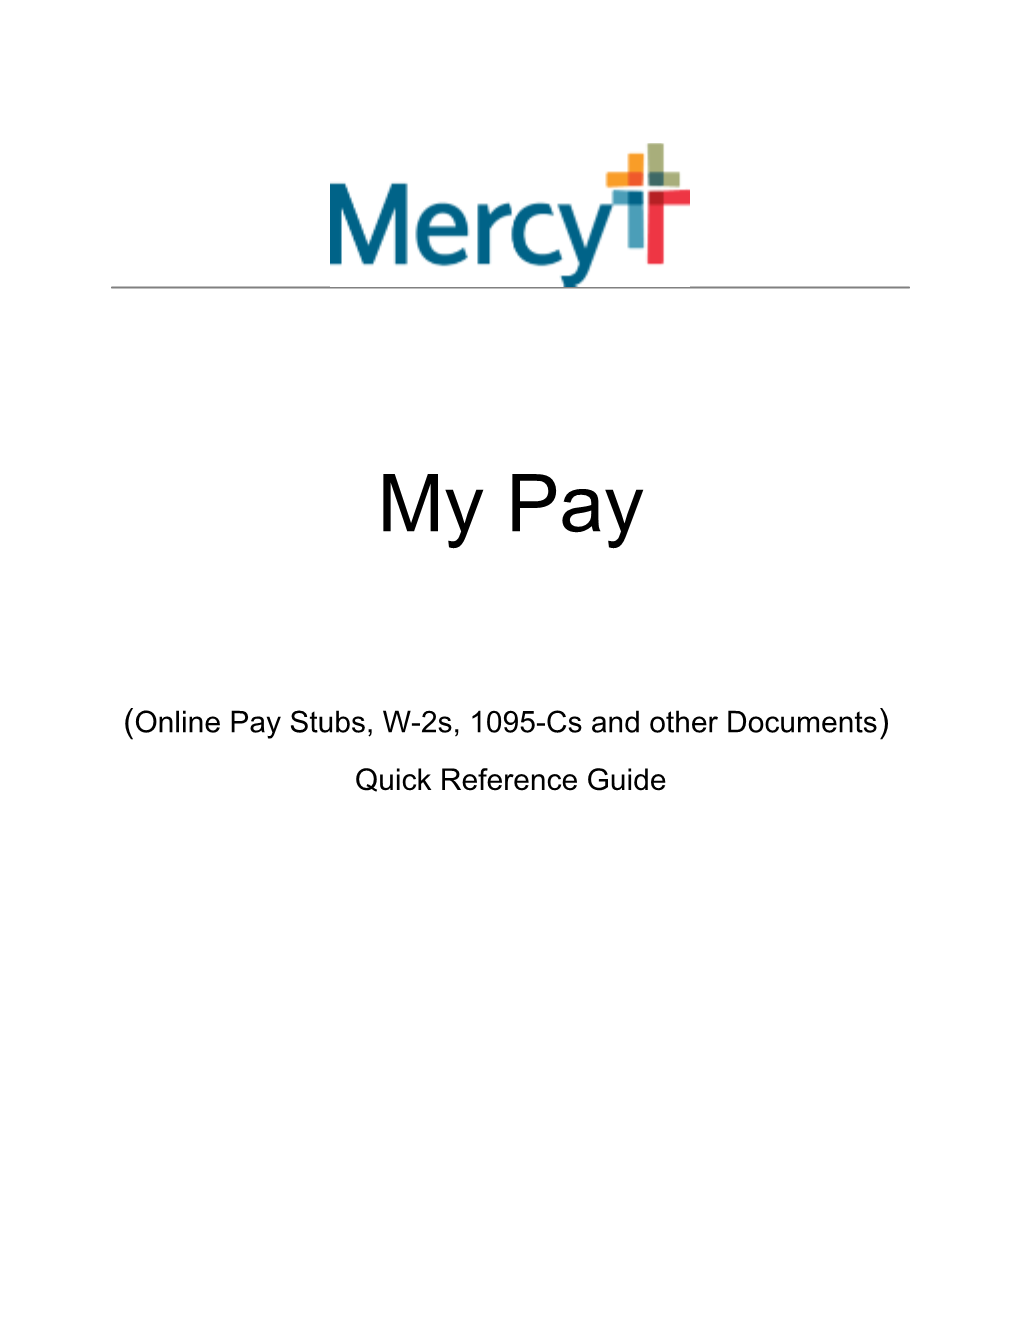 Online Pay Stubs, W-2S, 1095-Cs and Other Documents